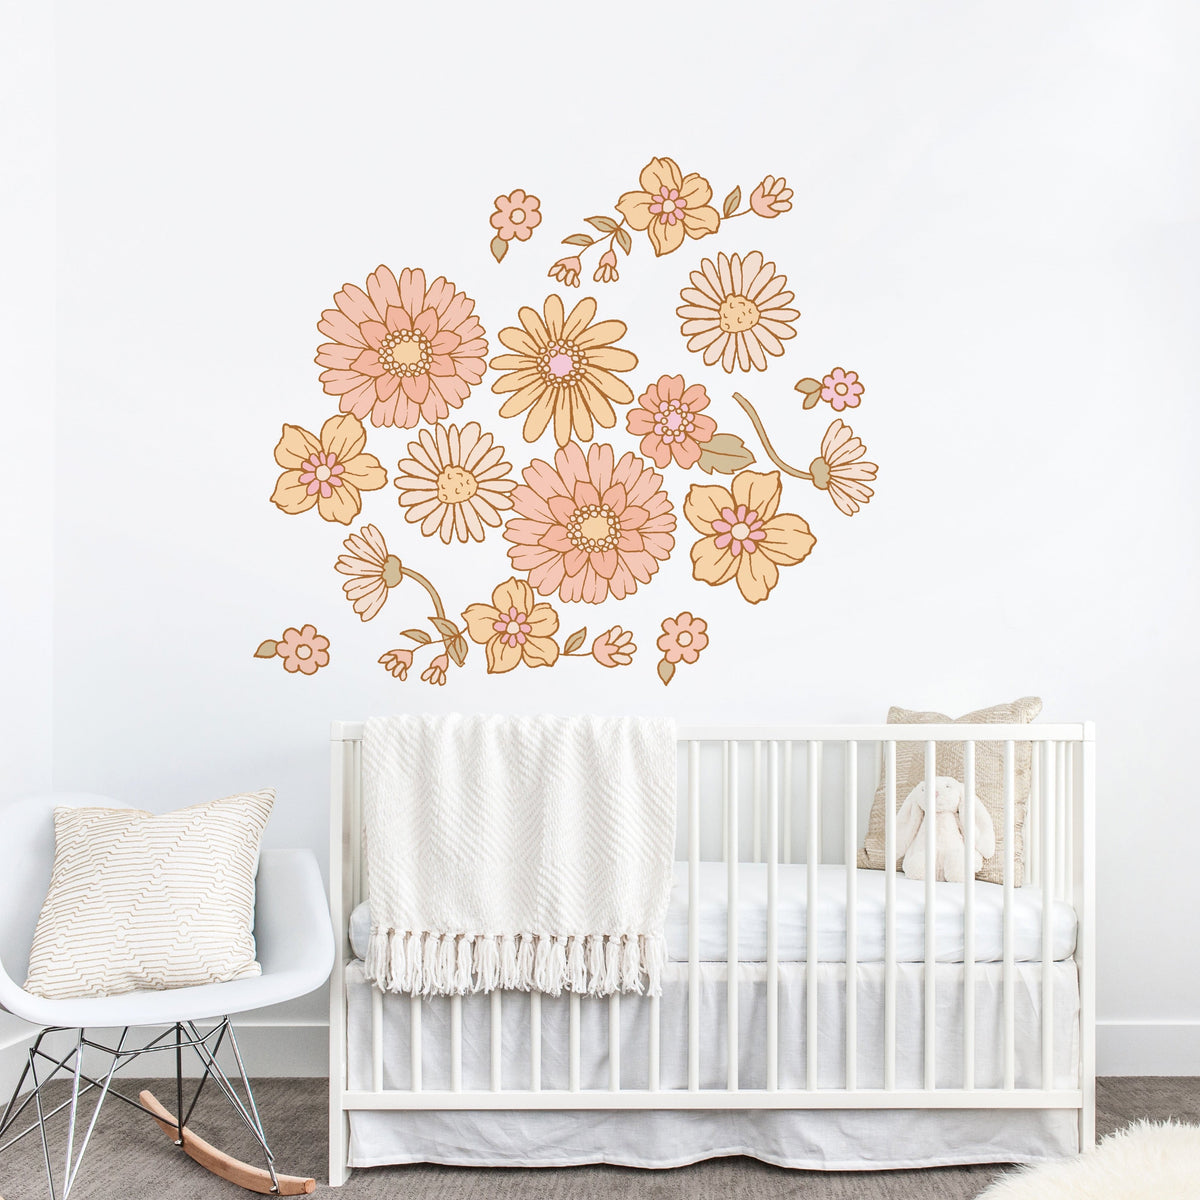 Daisy Wall Decal Set by Lovely People Studio